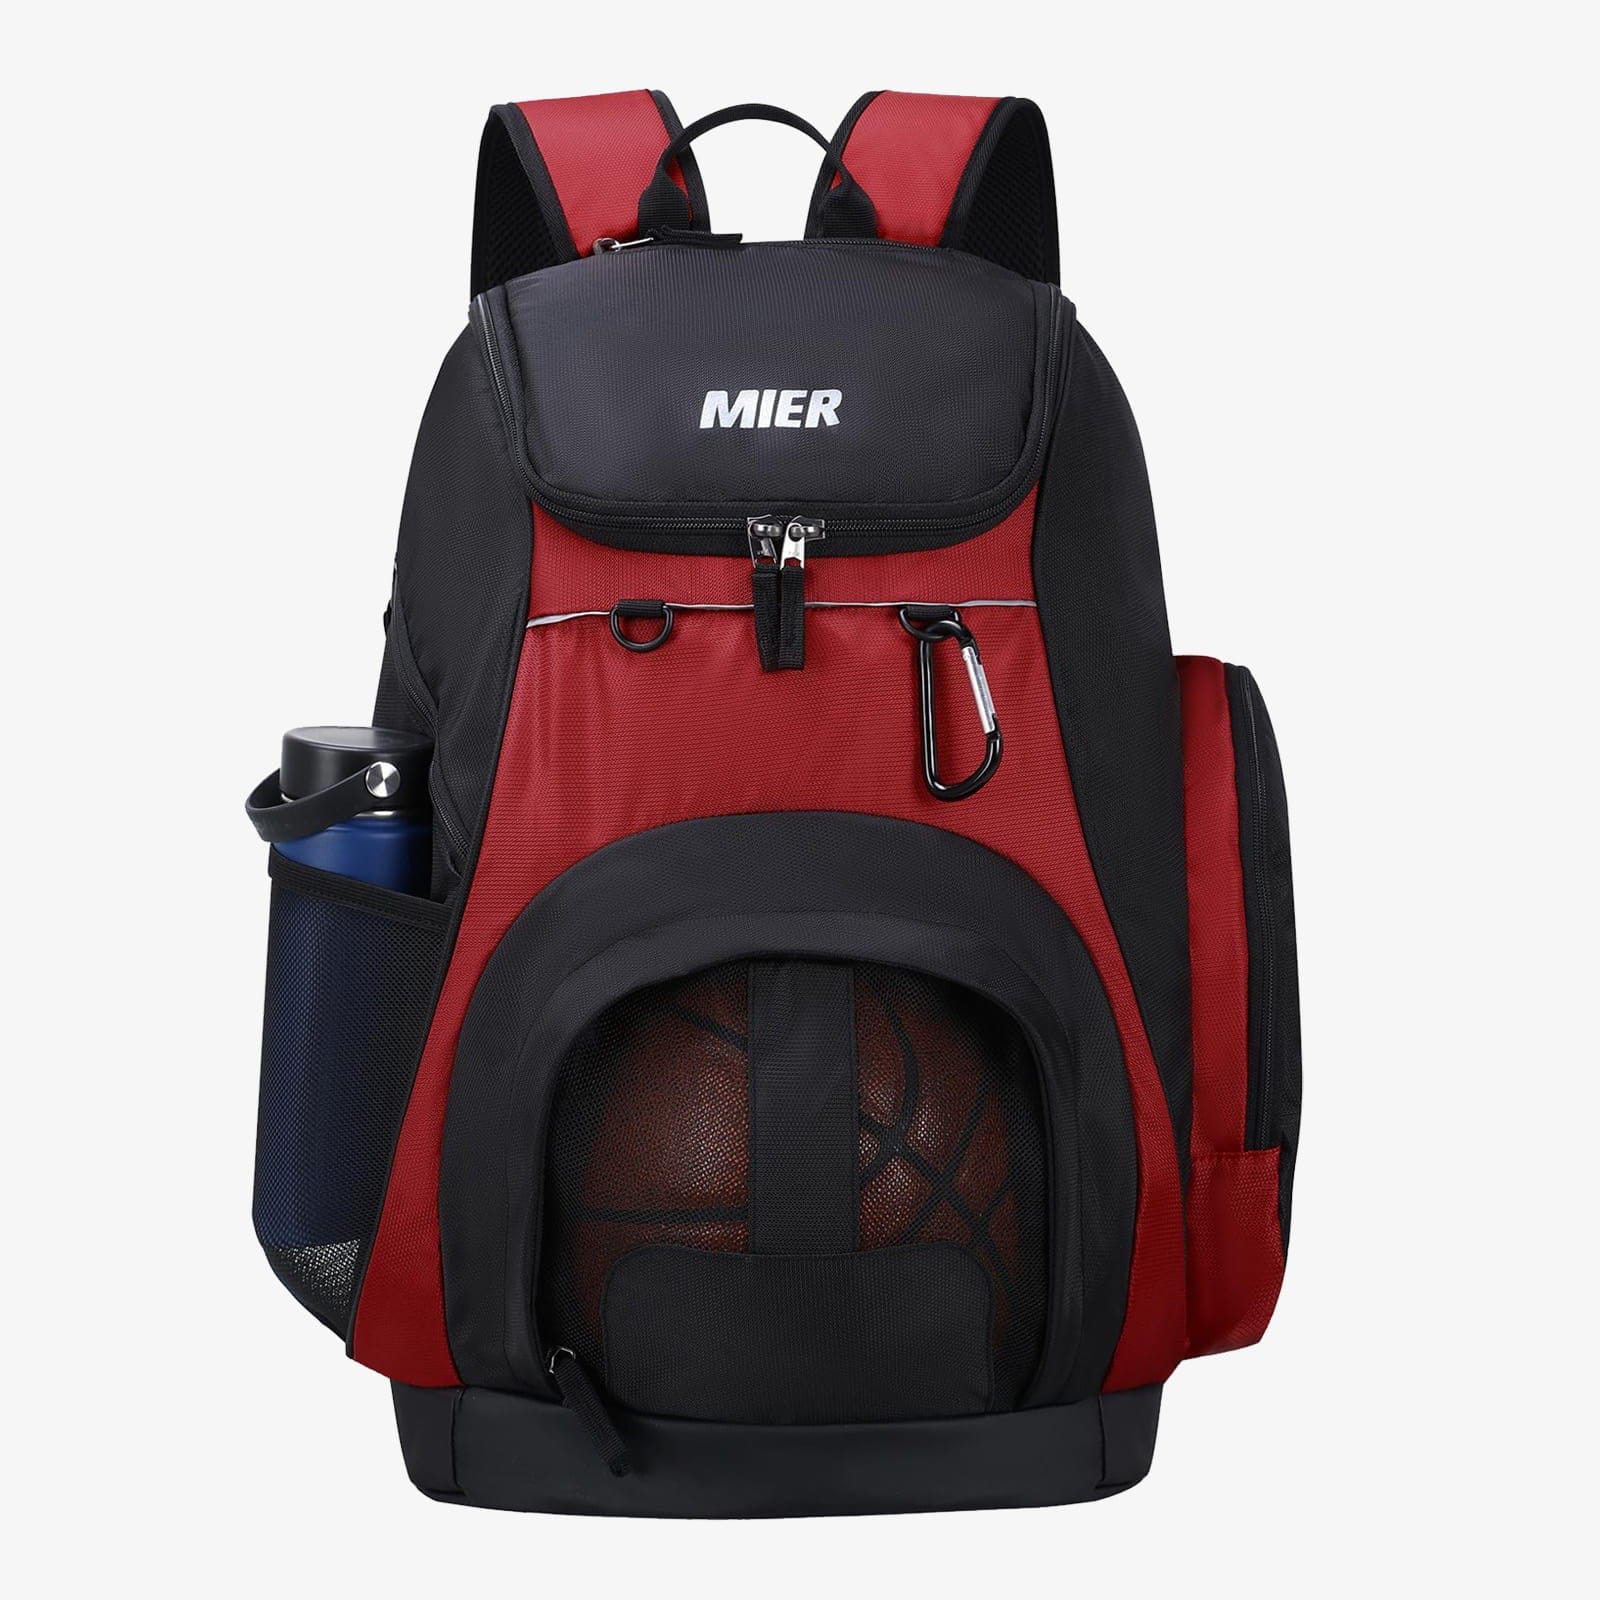 Basketball Backpack Large Sports Bag with Laptop Compartment Backpack Bag Red Black MIER